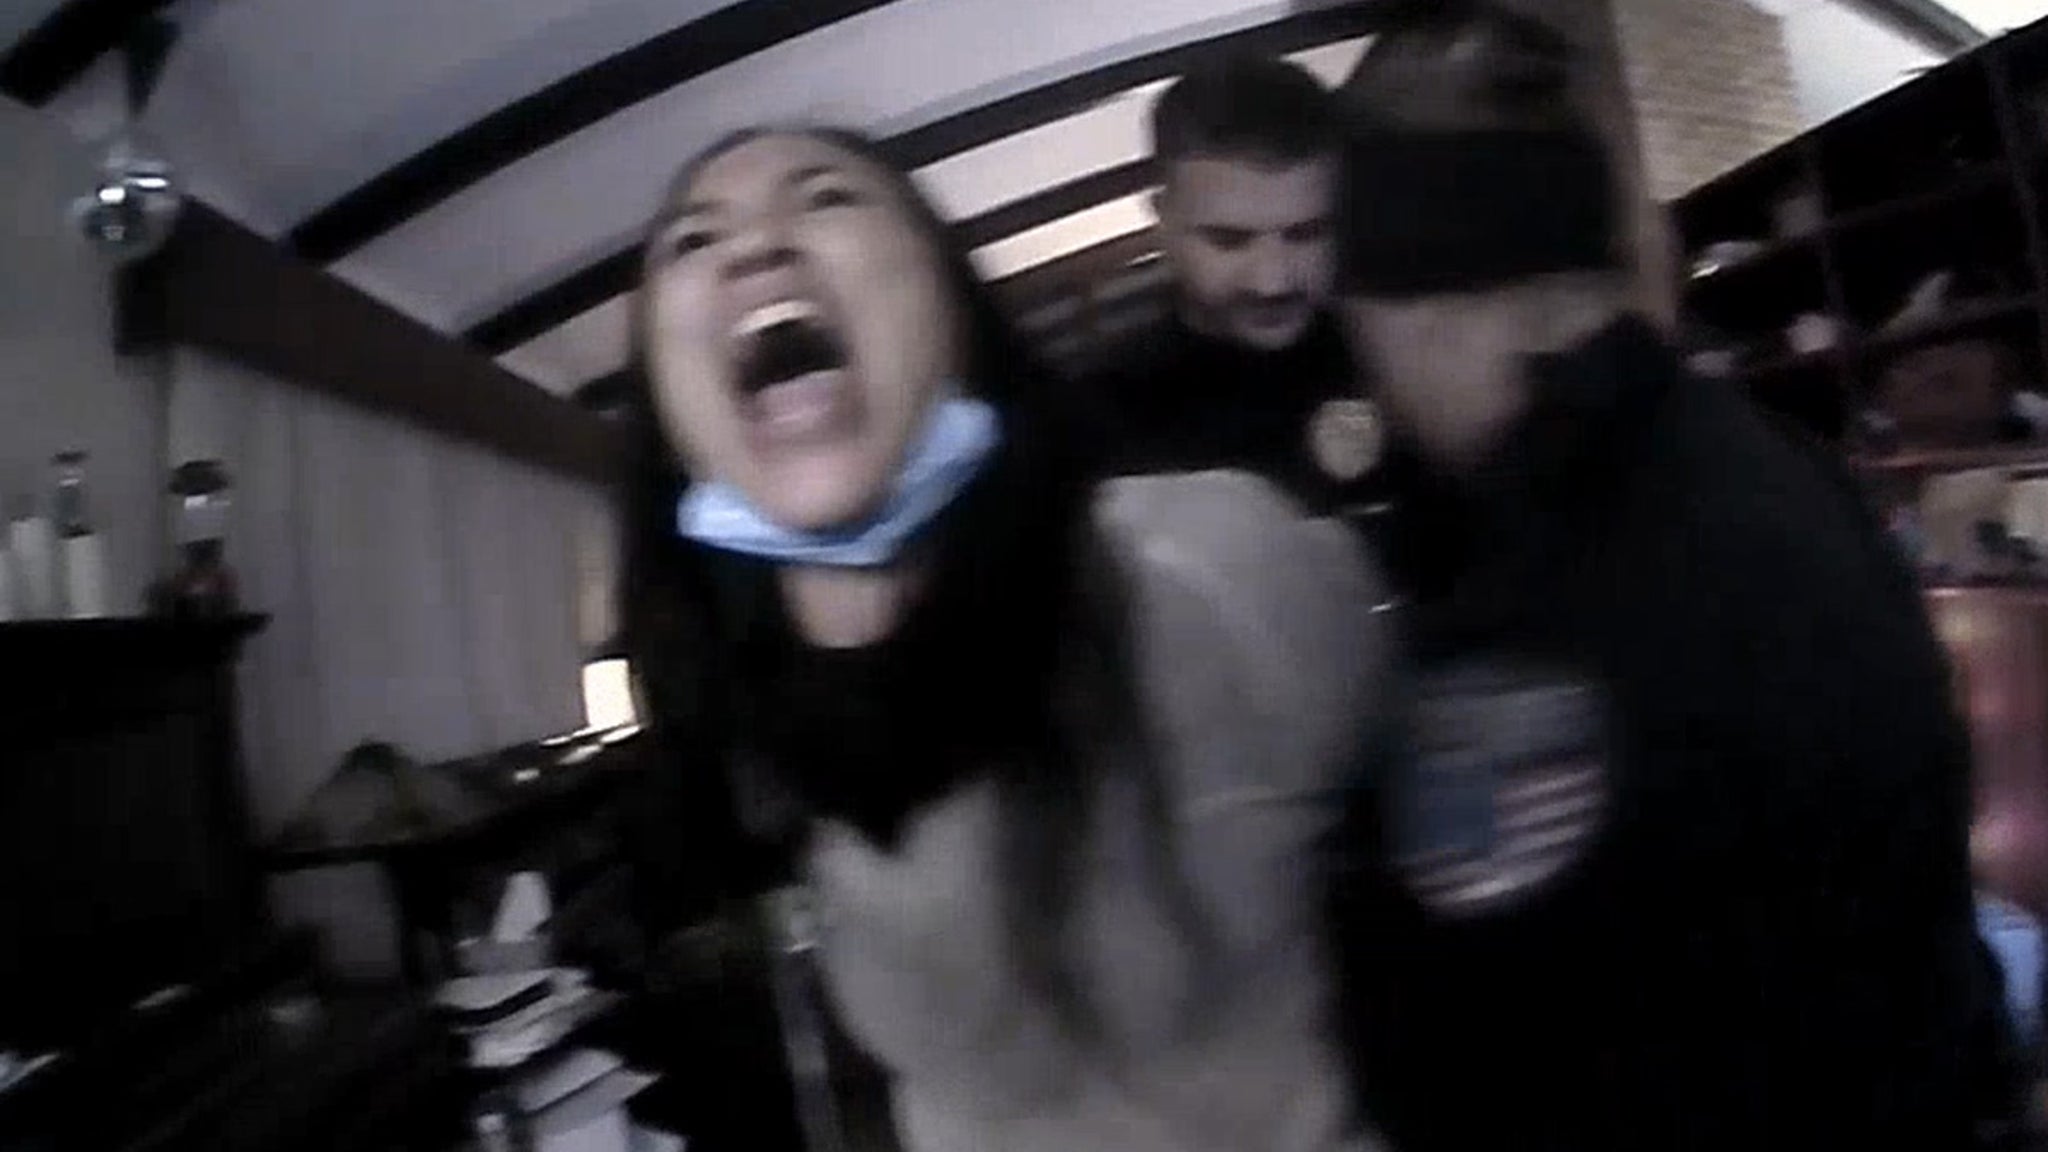 ‘Pocahontas’ star Irene Bedard screaming and belligerent in 2 detention videos